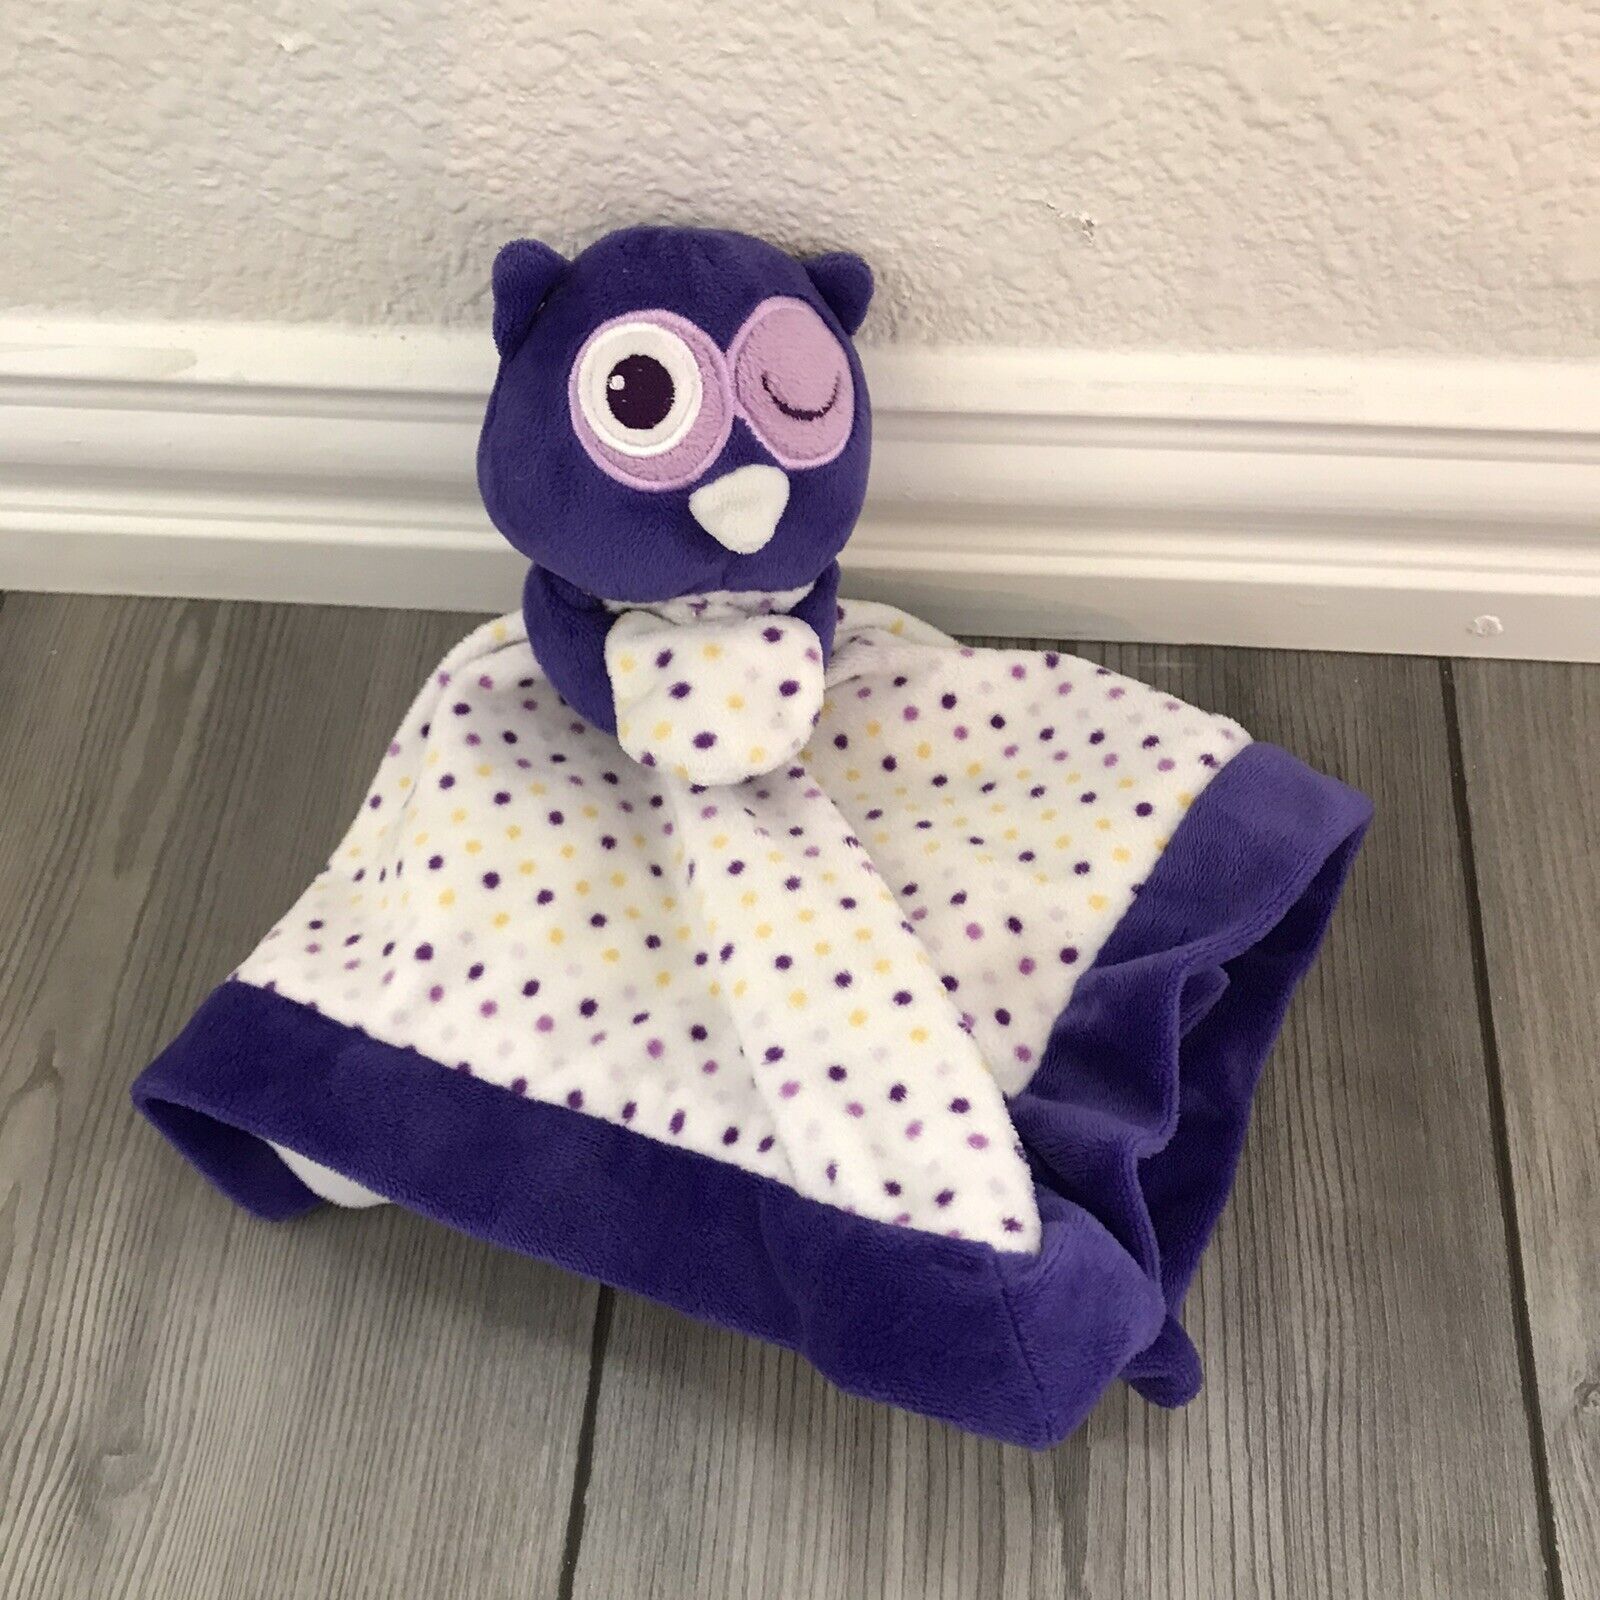 Jafra Owl Lovey Ranking TOP15 Purple Trim Winking Polka Plush Dots E Now free shipping Security